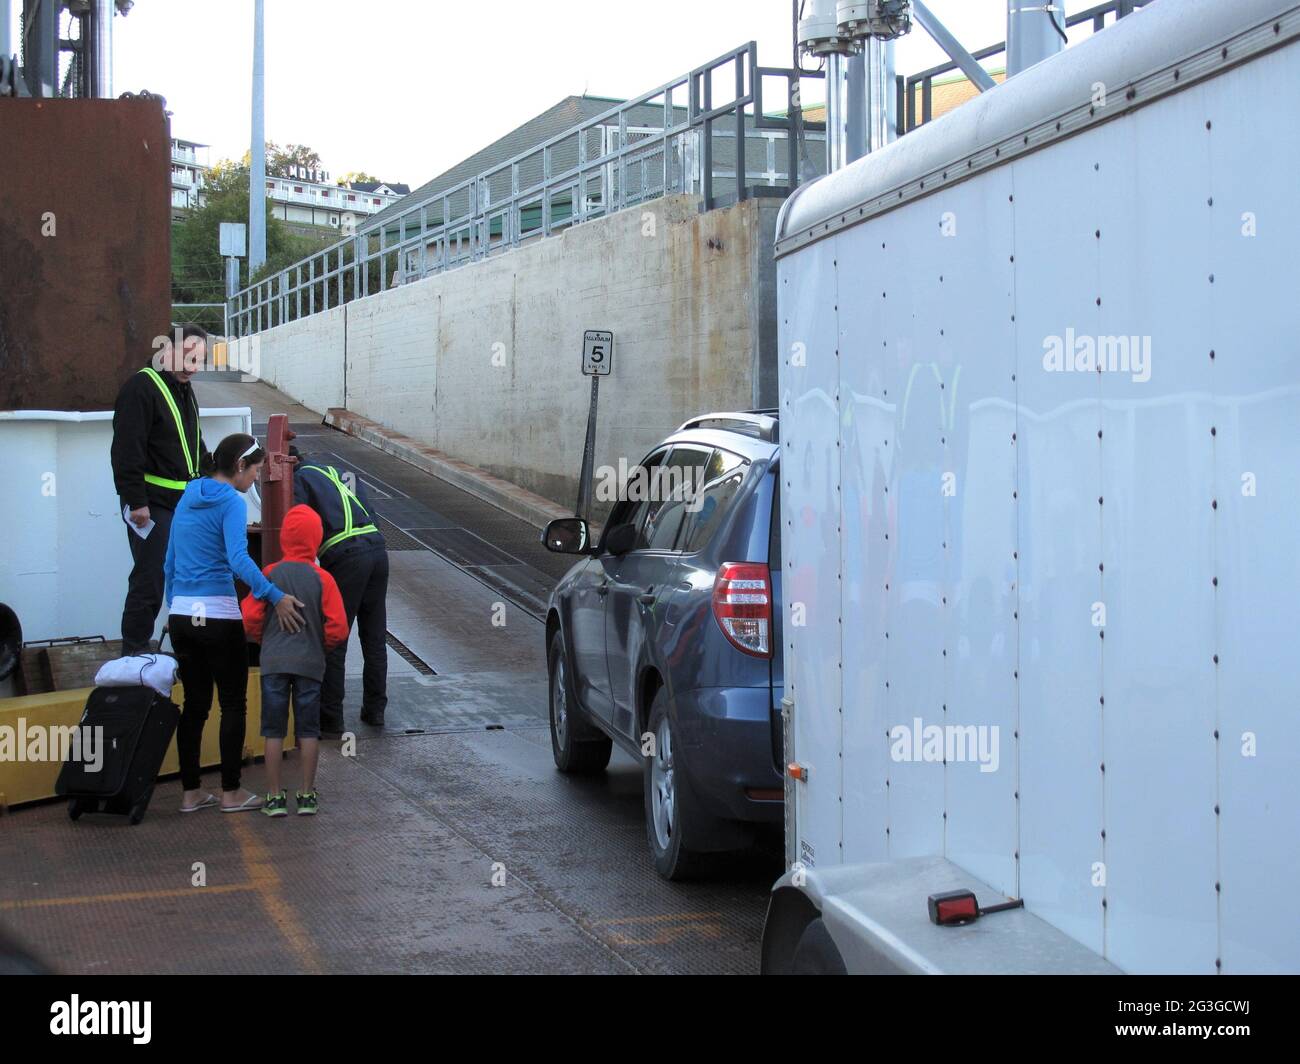 Car with trailer and people disembarking from a ferry boat Stock Photo